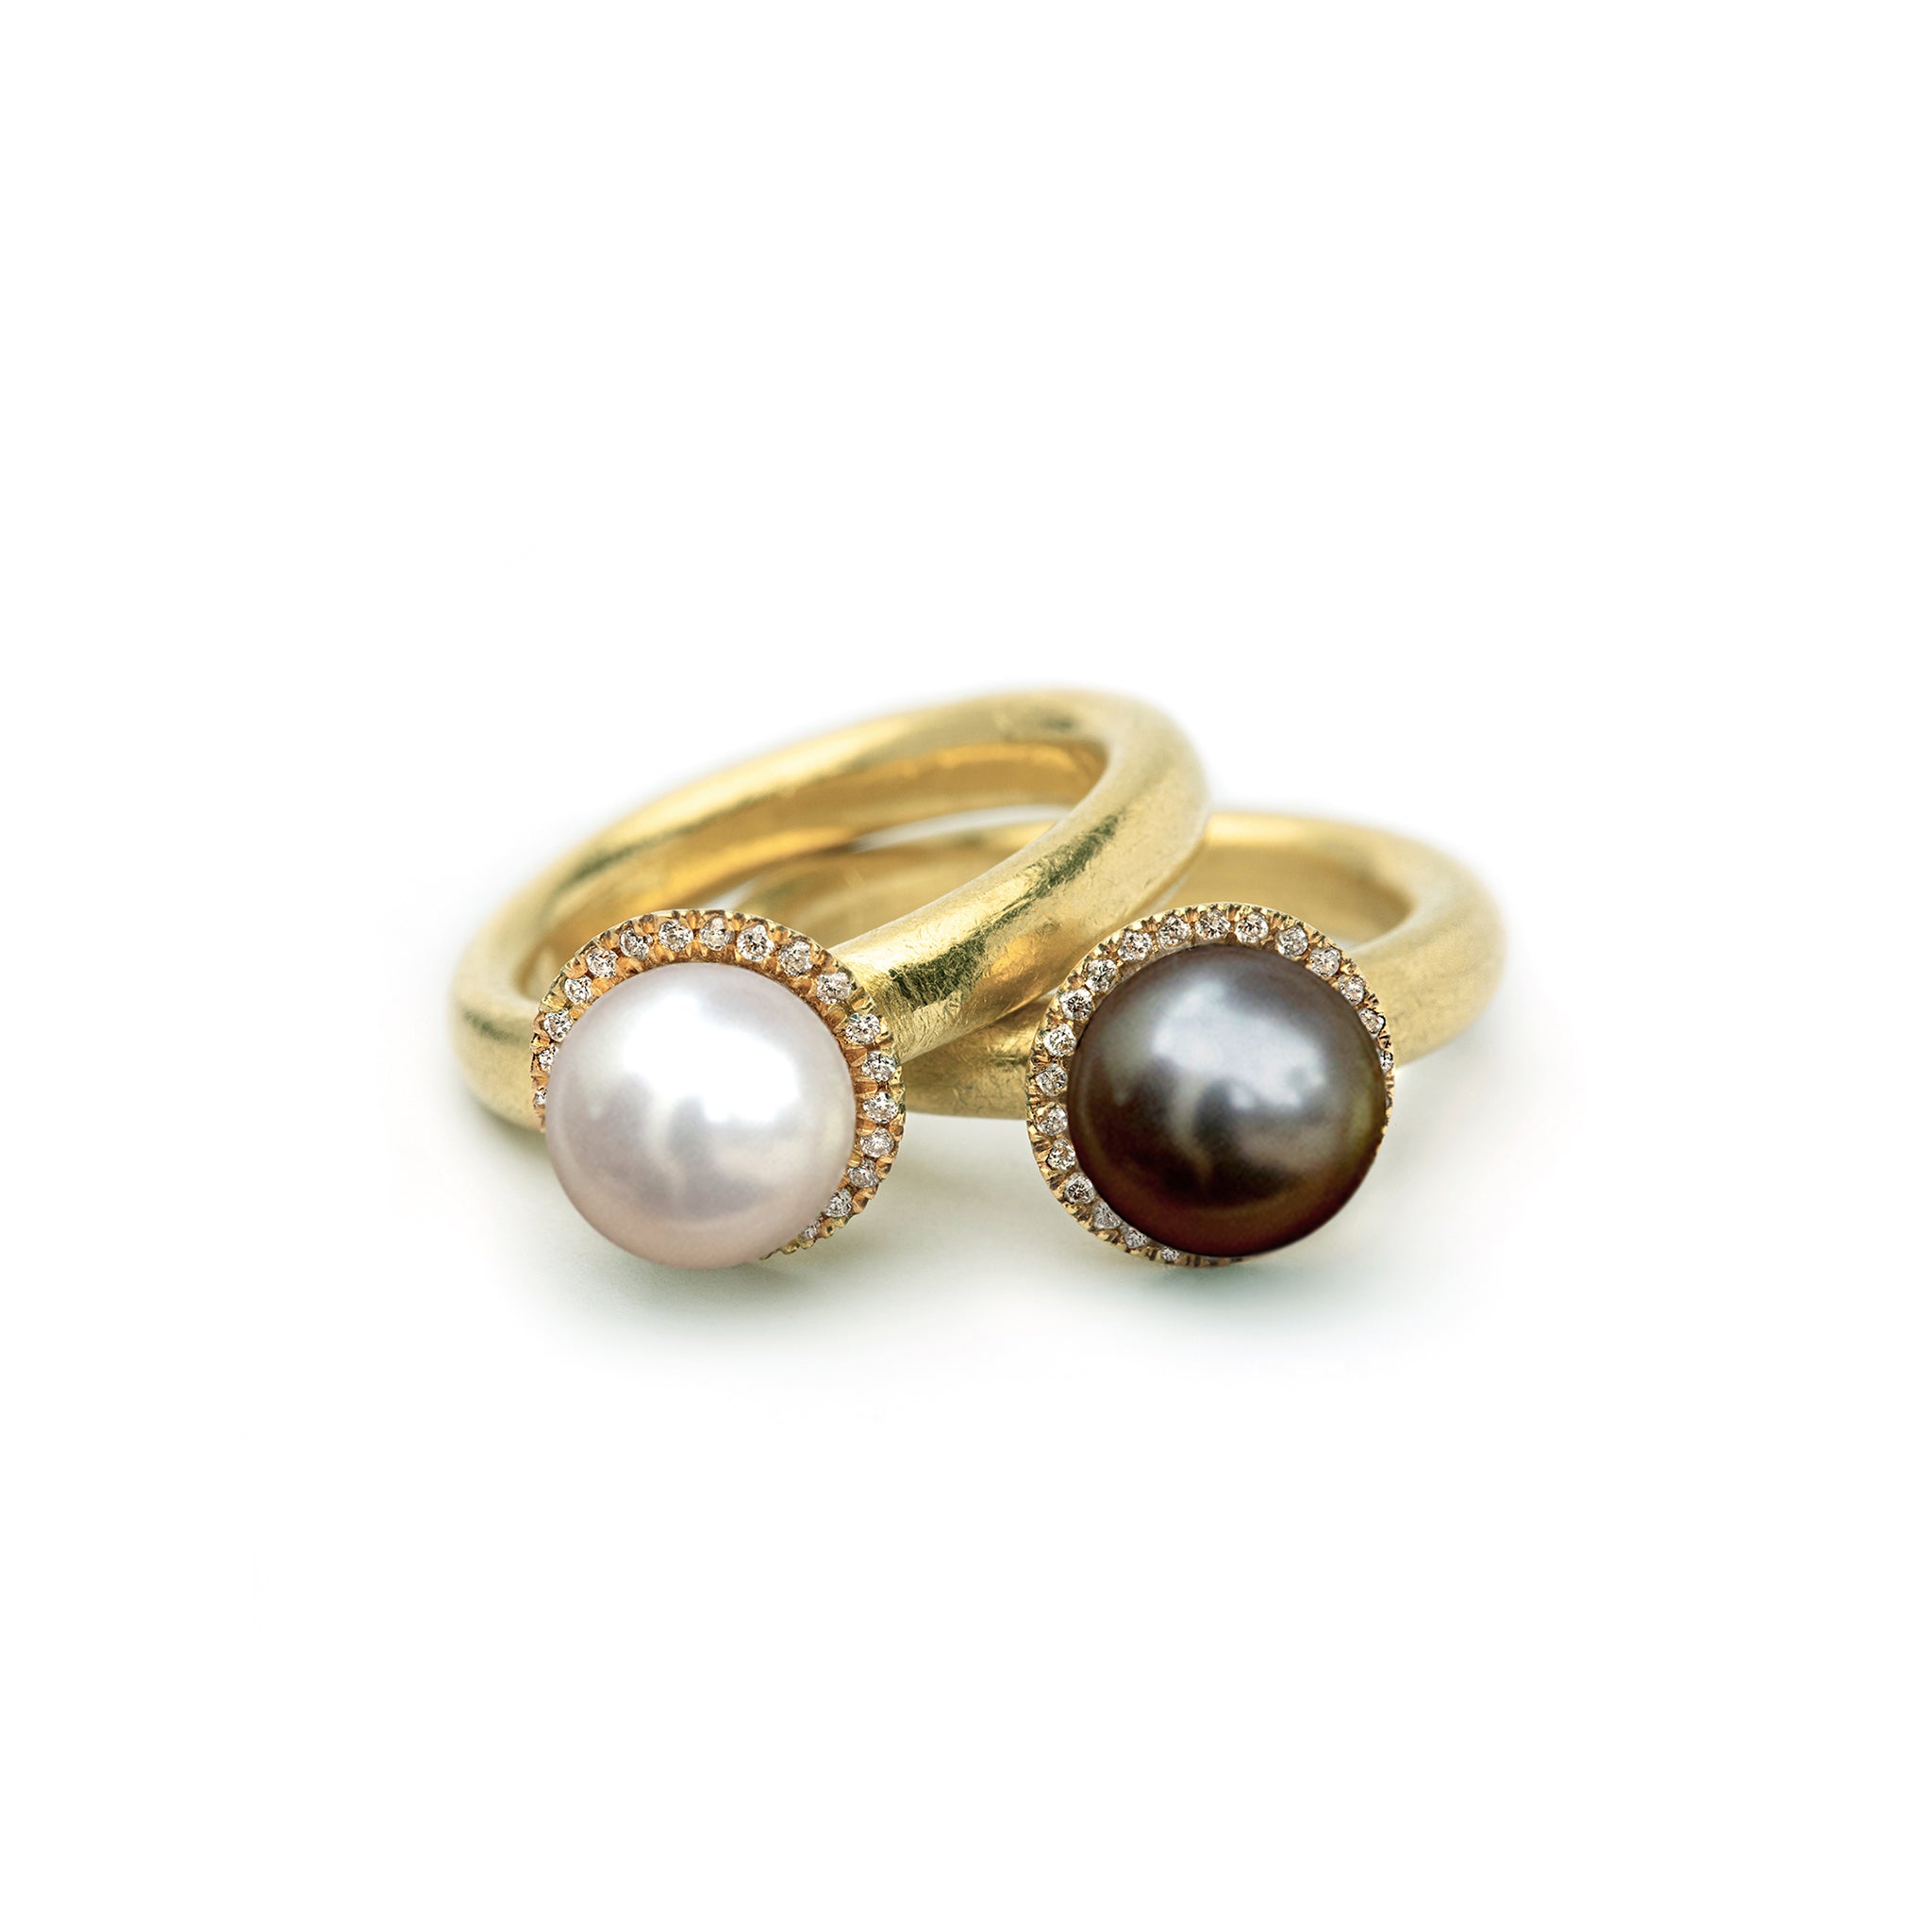 Anat gelbard, jewelry, designed jewelry, handcrafted jewellery, designed jewelry, gold ring, gold ring with diamond, gold ring for women, rose gold ring, white gold ring, 18k gold ring, 22k gold ring, ring with diamond, engagement rings, engagement rings for women, wedding rings for women, gemstone rings, pearl ring, gemstone jewelry, gem jewels,